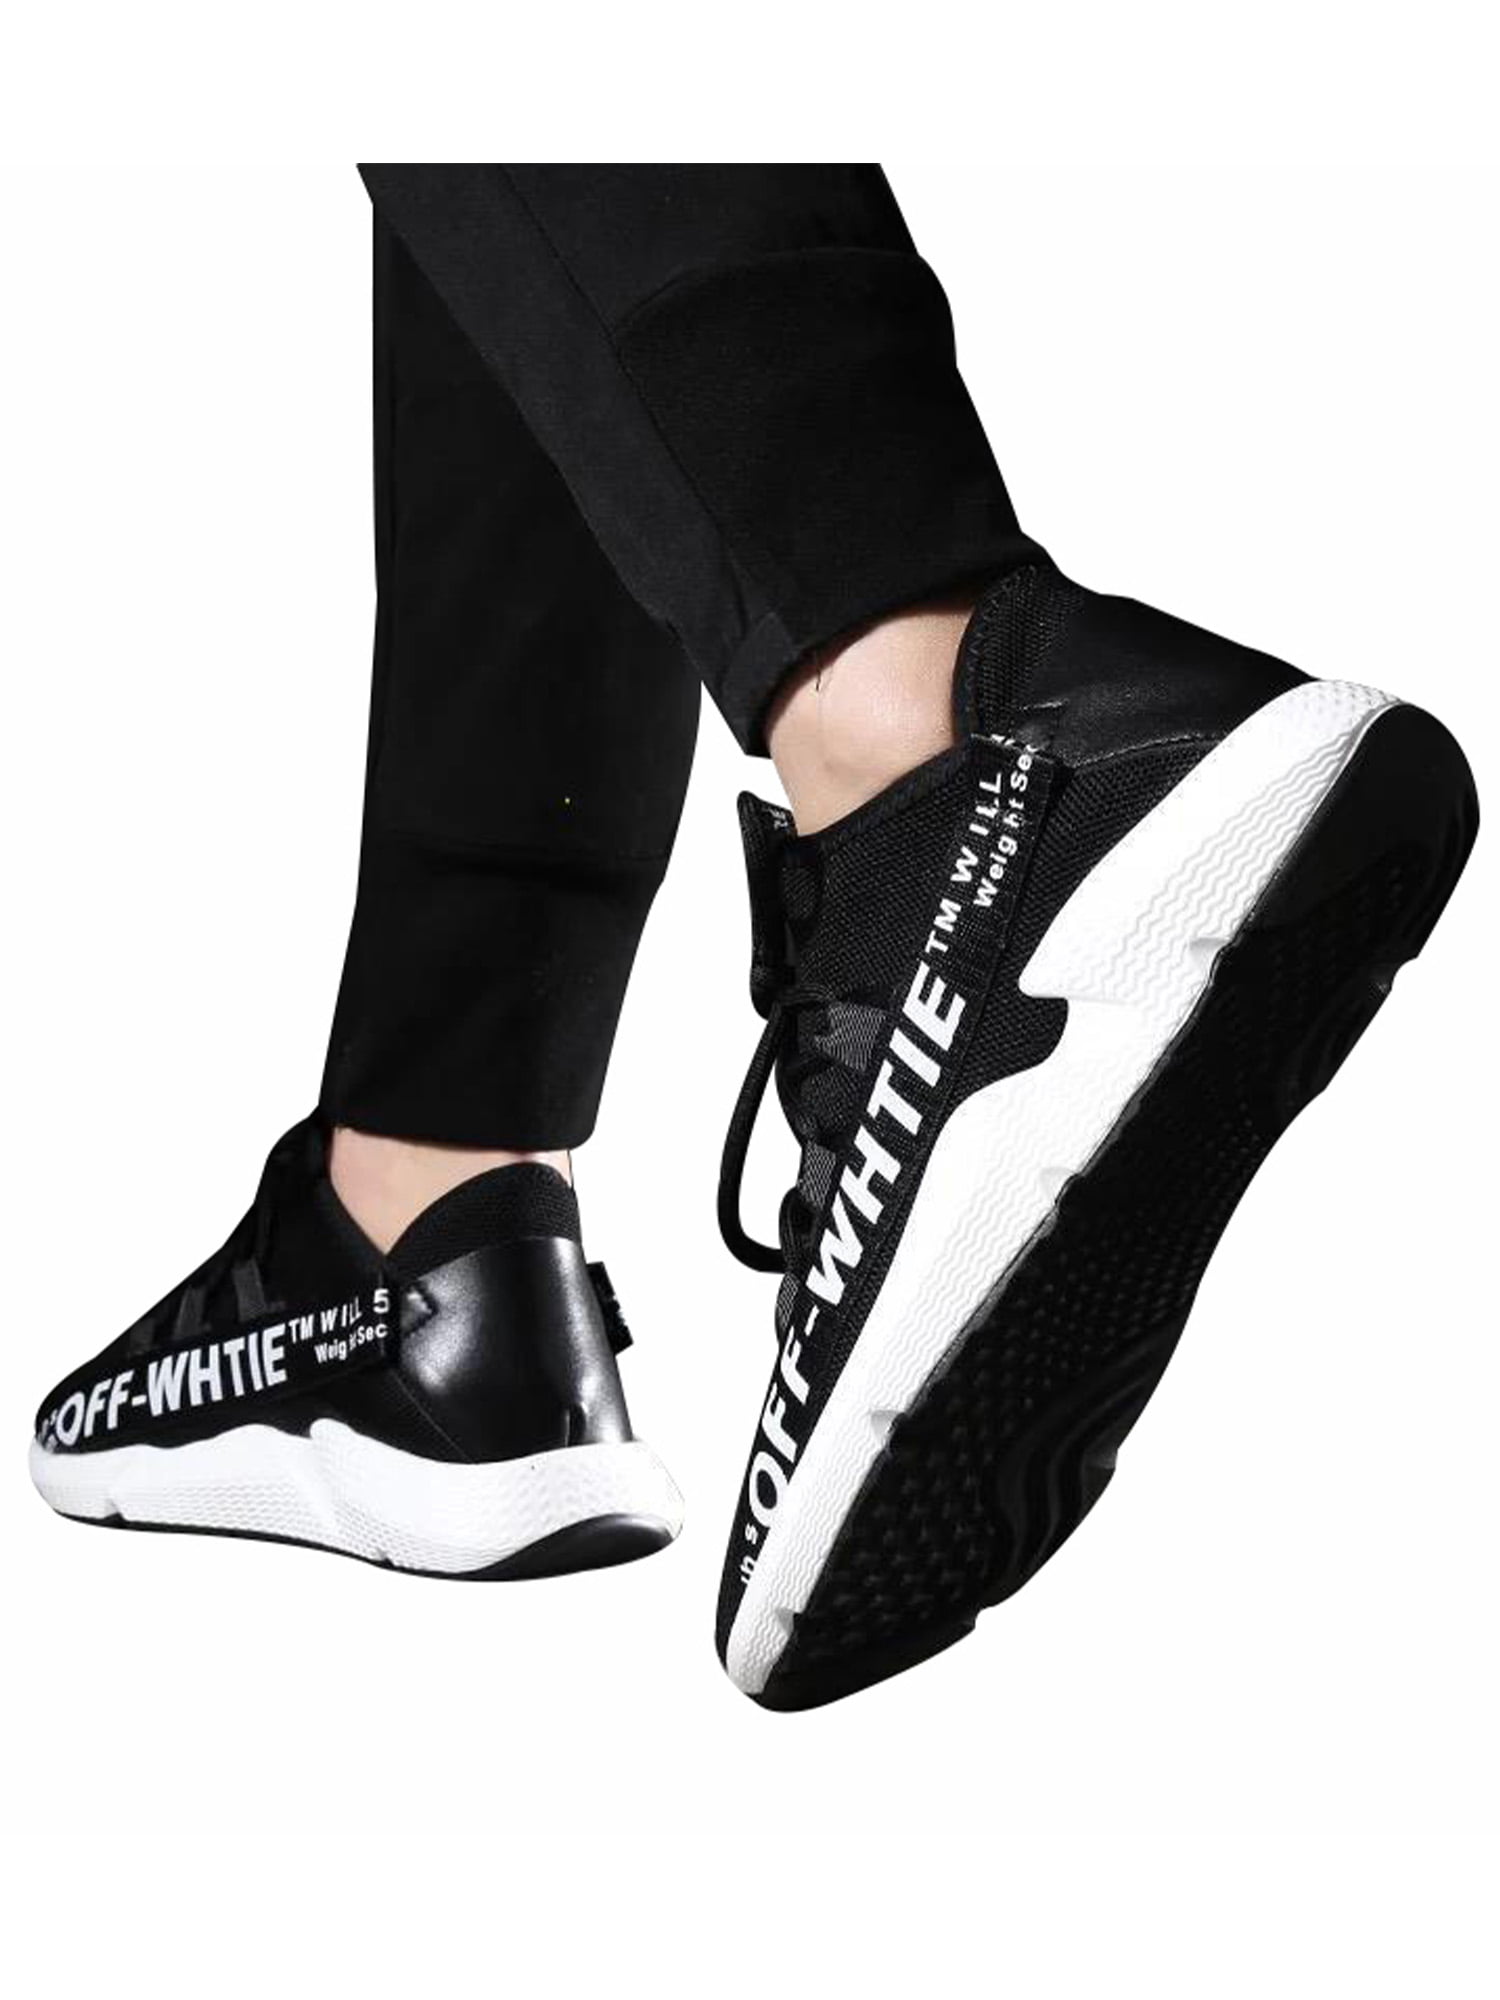 Men's Running Sneakers Casual Athletic Tennis Shoes Outdoor Walking Trainers Gym 